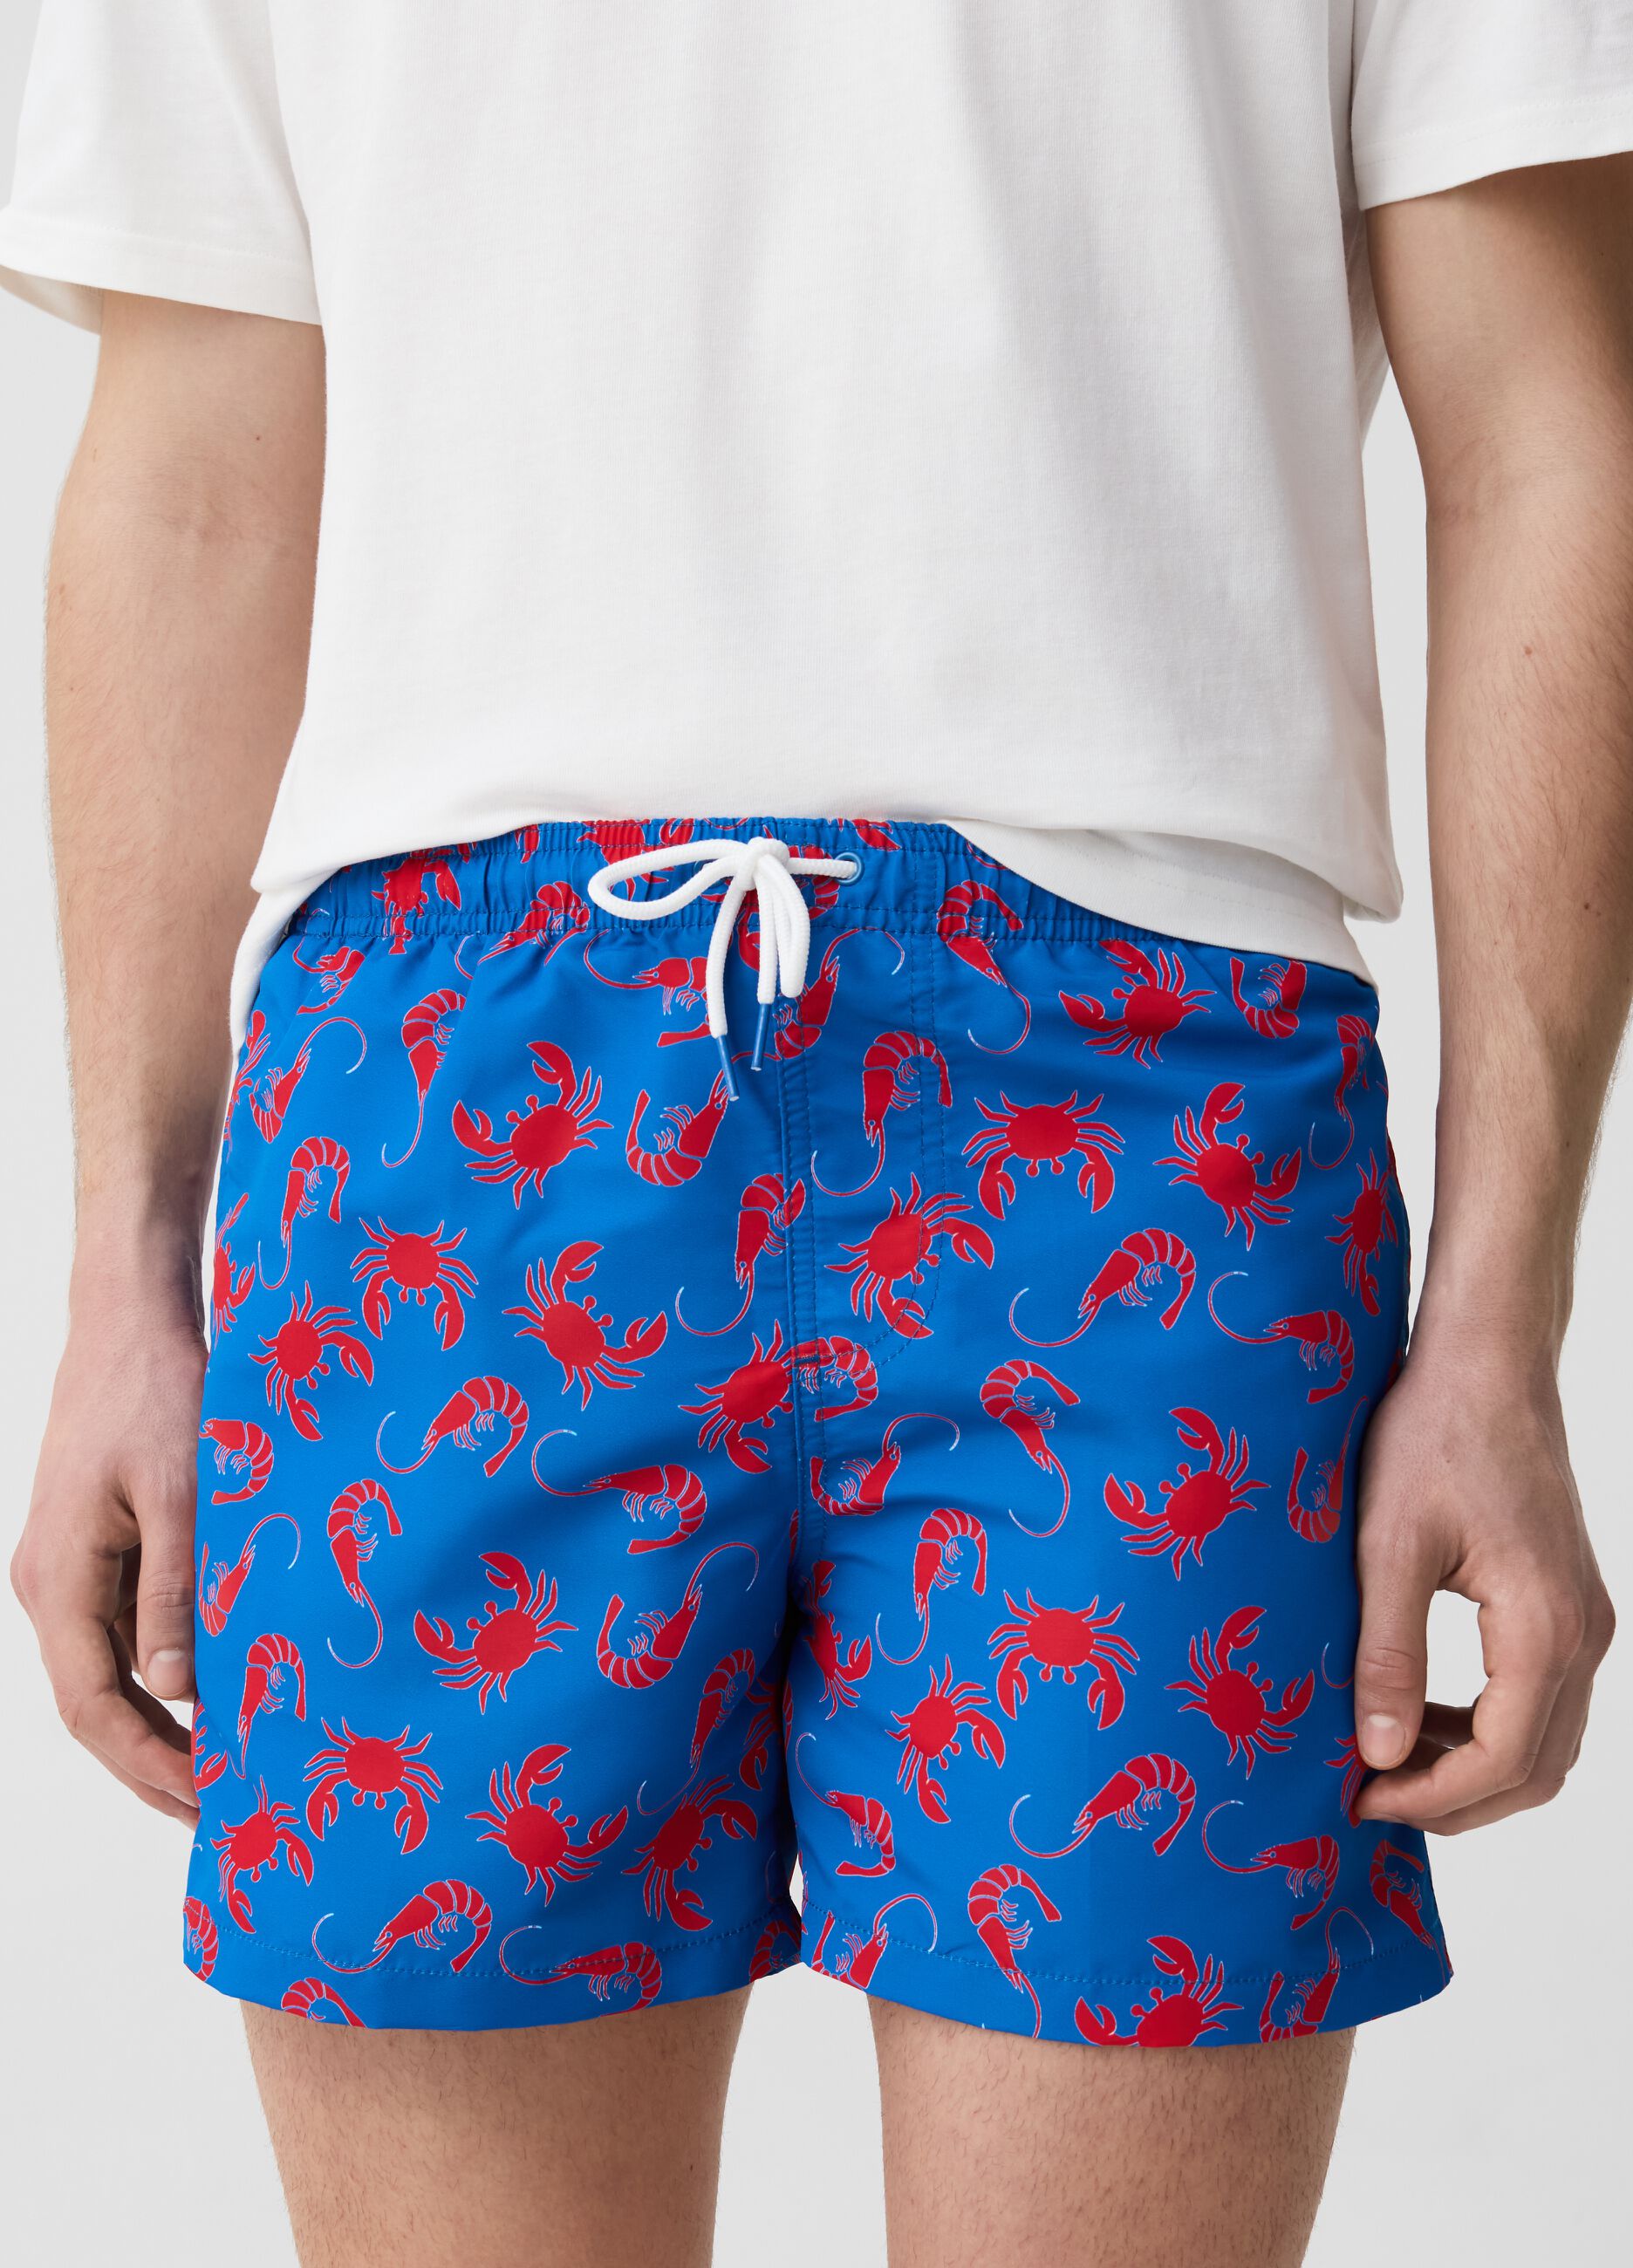 Swimming trunks with crabs print